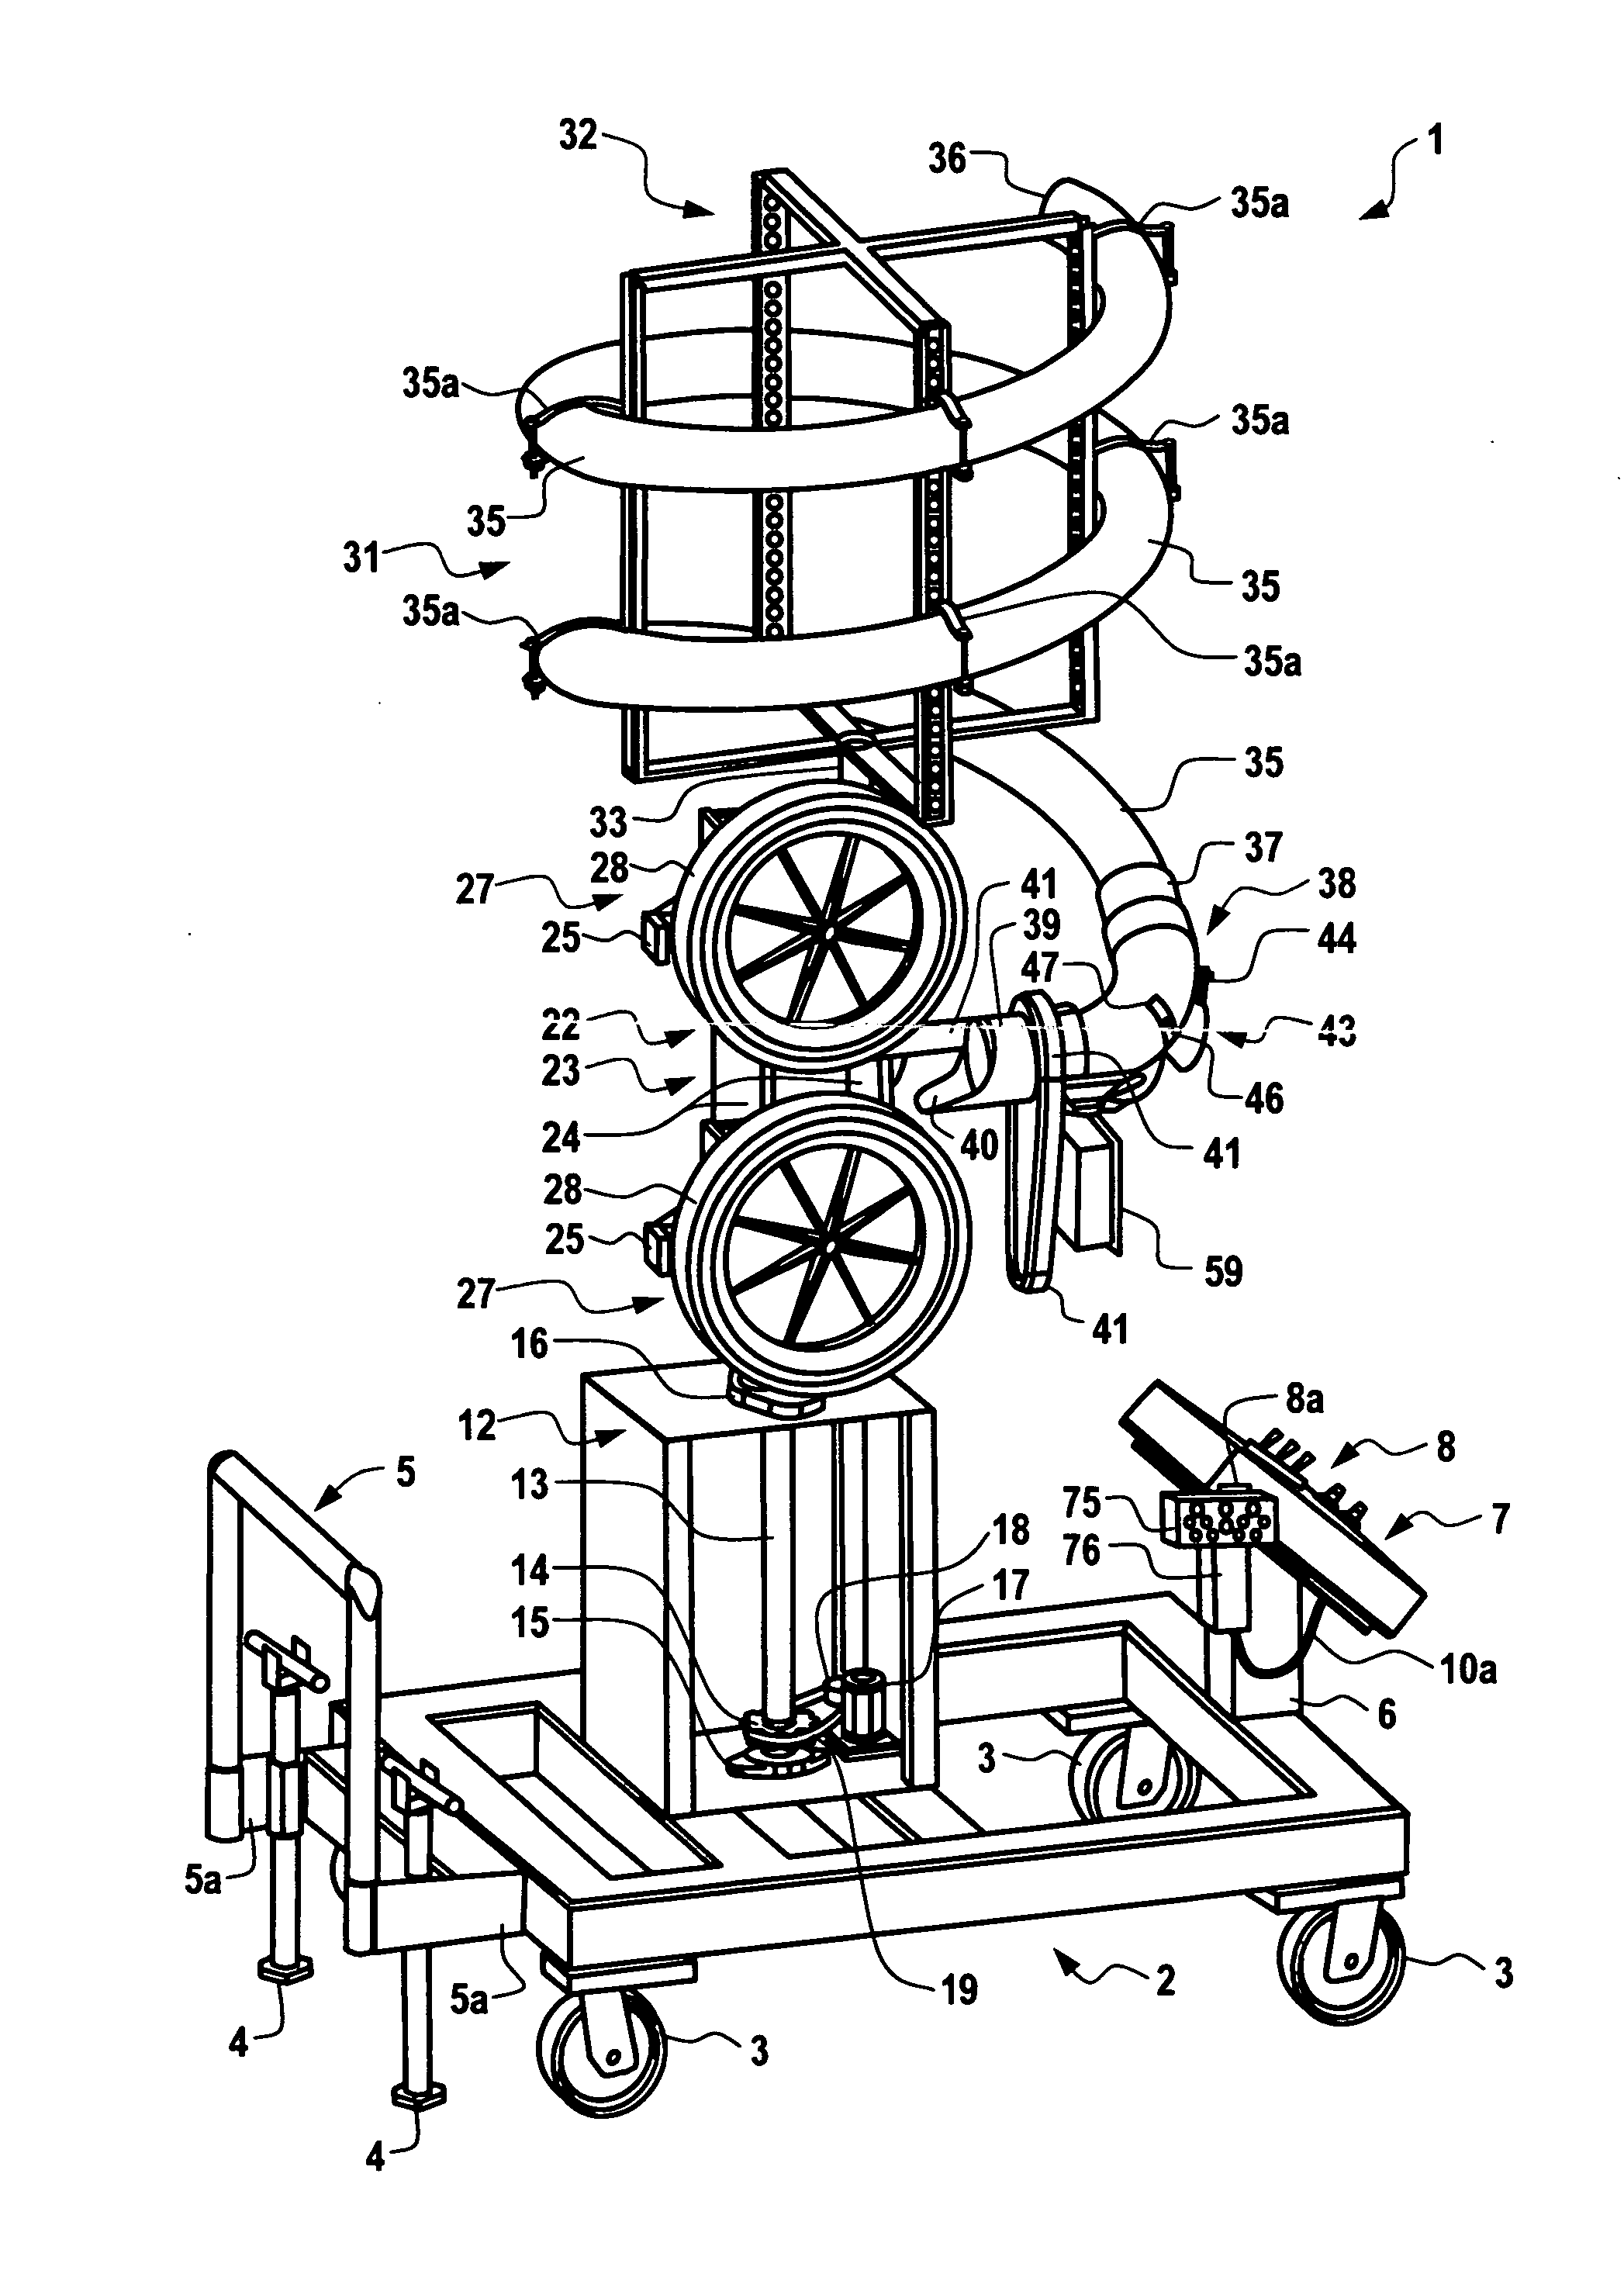 Programmable ball throwing apparatus